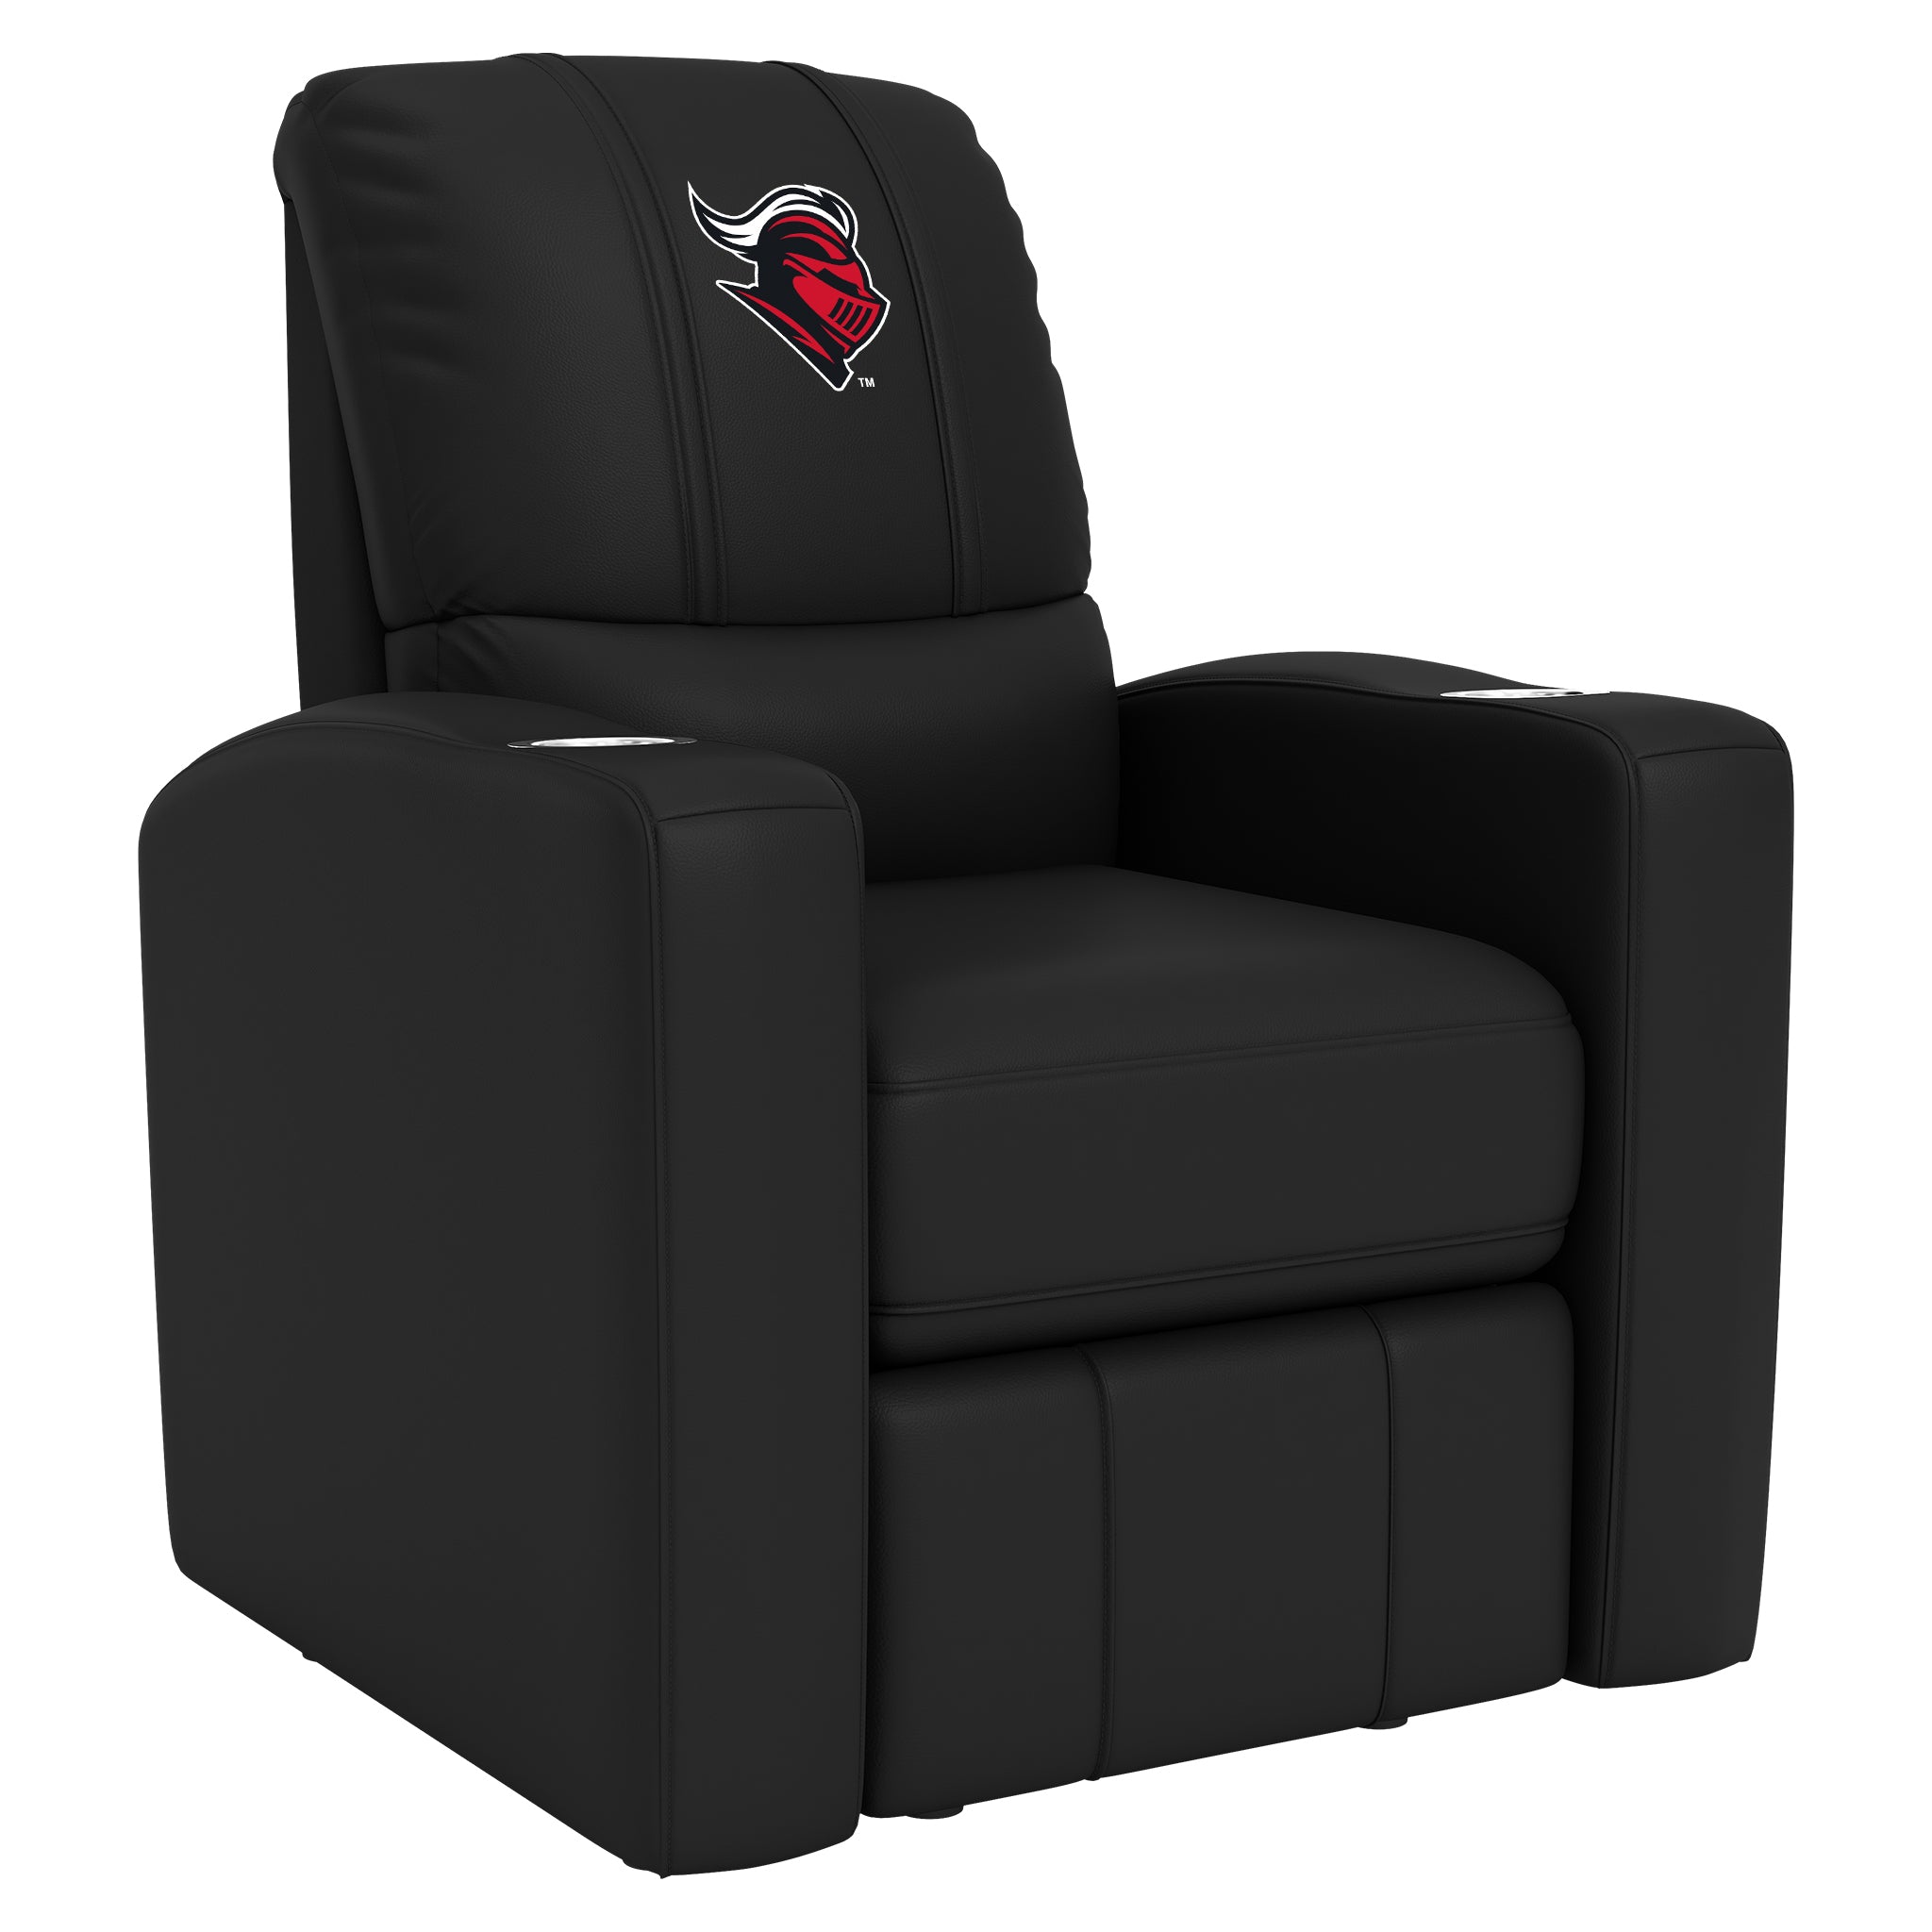 Rutgers Scarlet Knights Stealth Recliner with Rutgers Scarlet Knights Head Logo